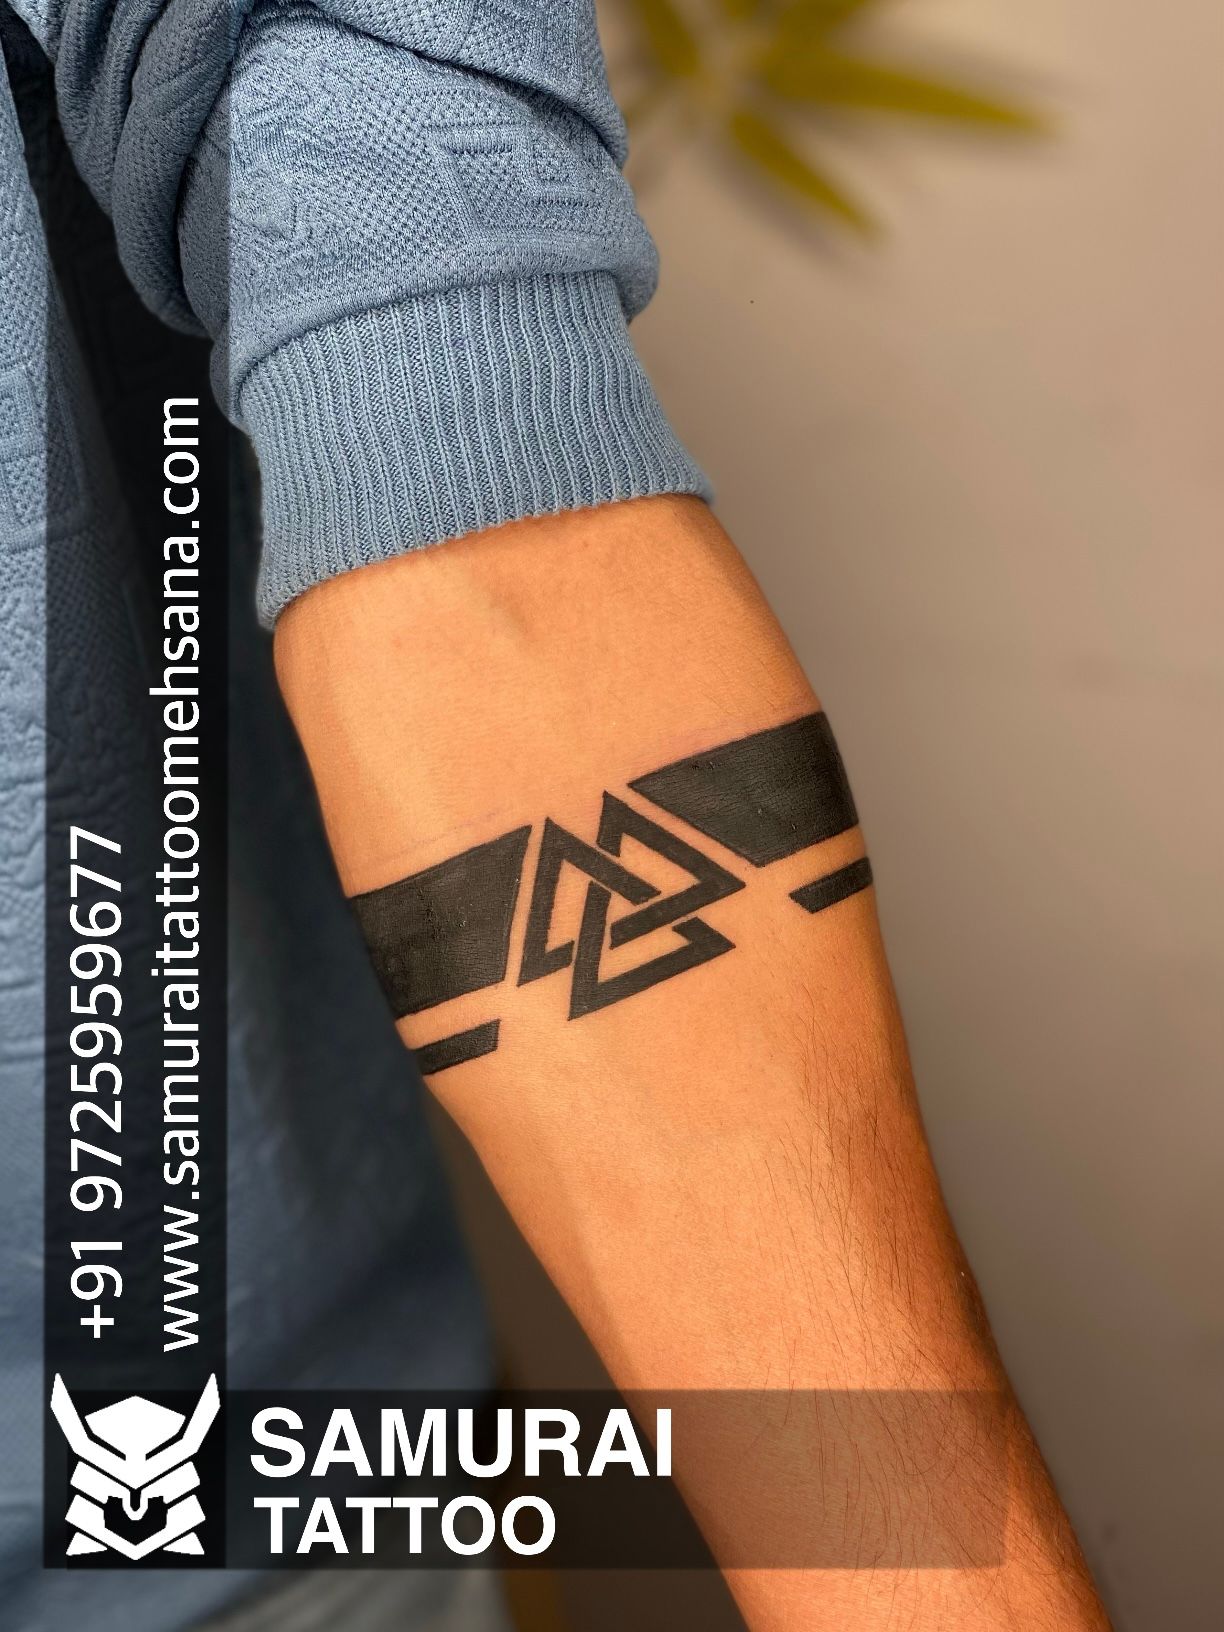 29+ Significant Armband Tattoos – Meanings and Designs (2019) →  Tracesofmybody.com → Best Tattoo Ideas | Armband tattoo meaning, Arm band  tattoo, Band tattoo designs